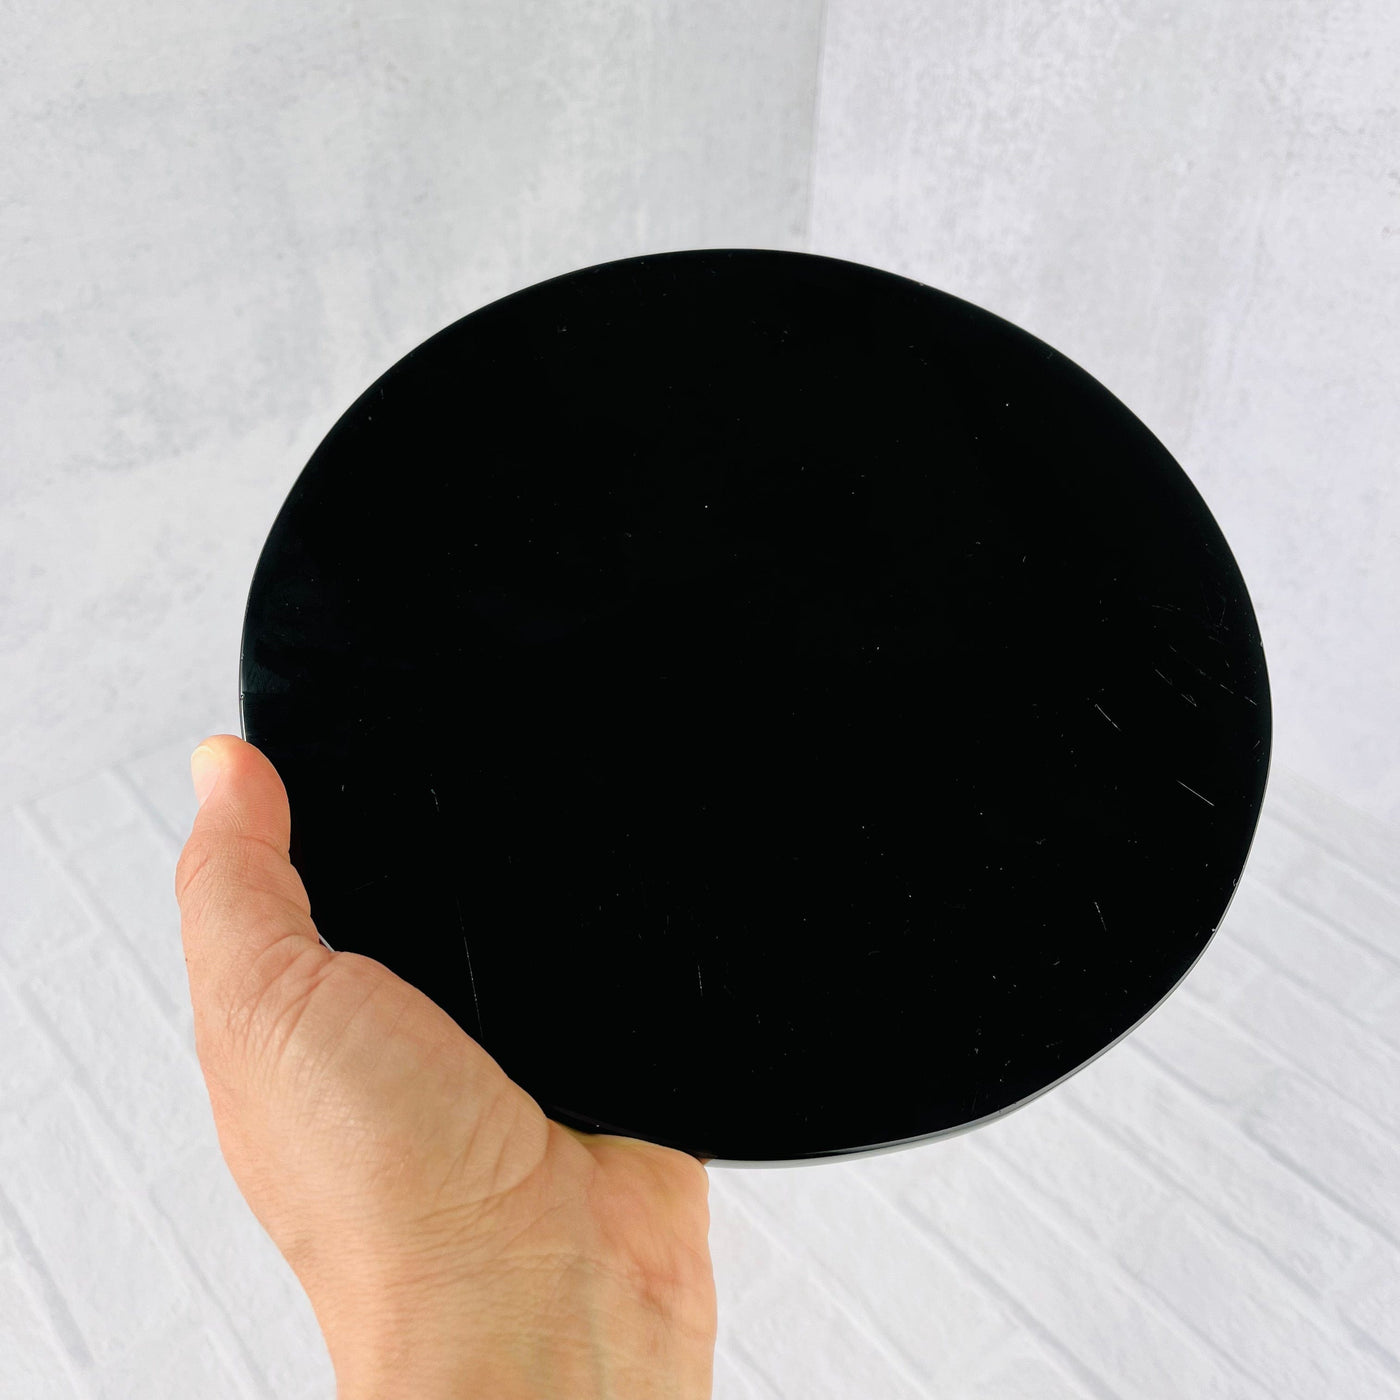 Back view of Black Obsidian Flower of Life Plate, held up by woman's hand.